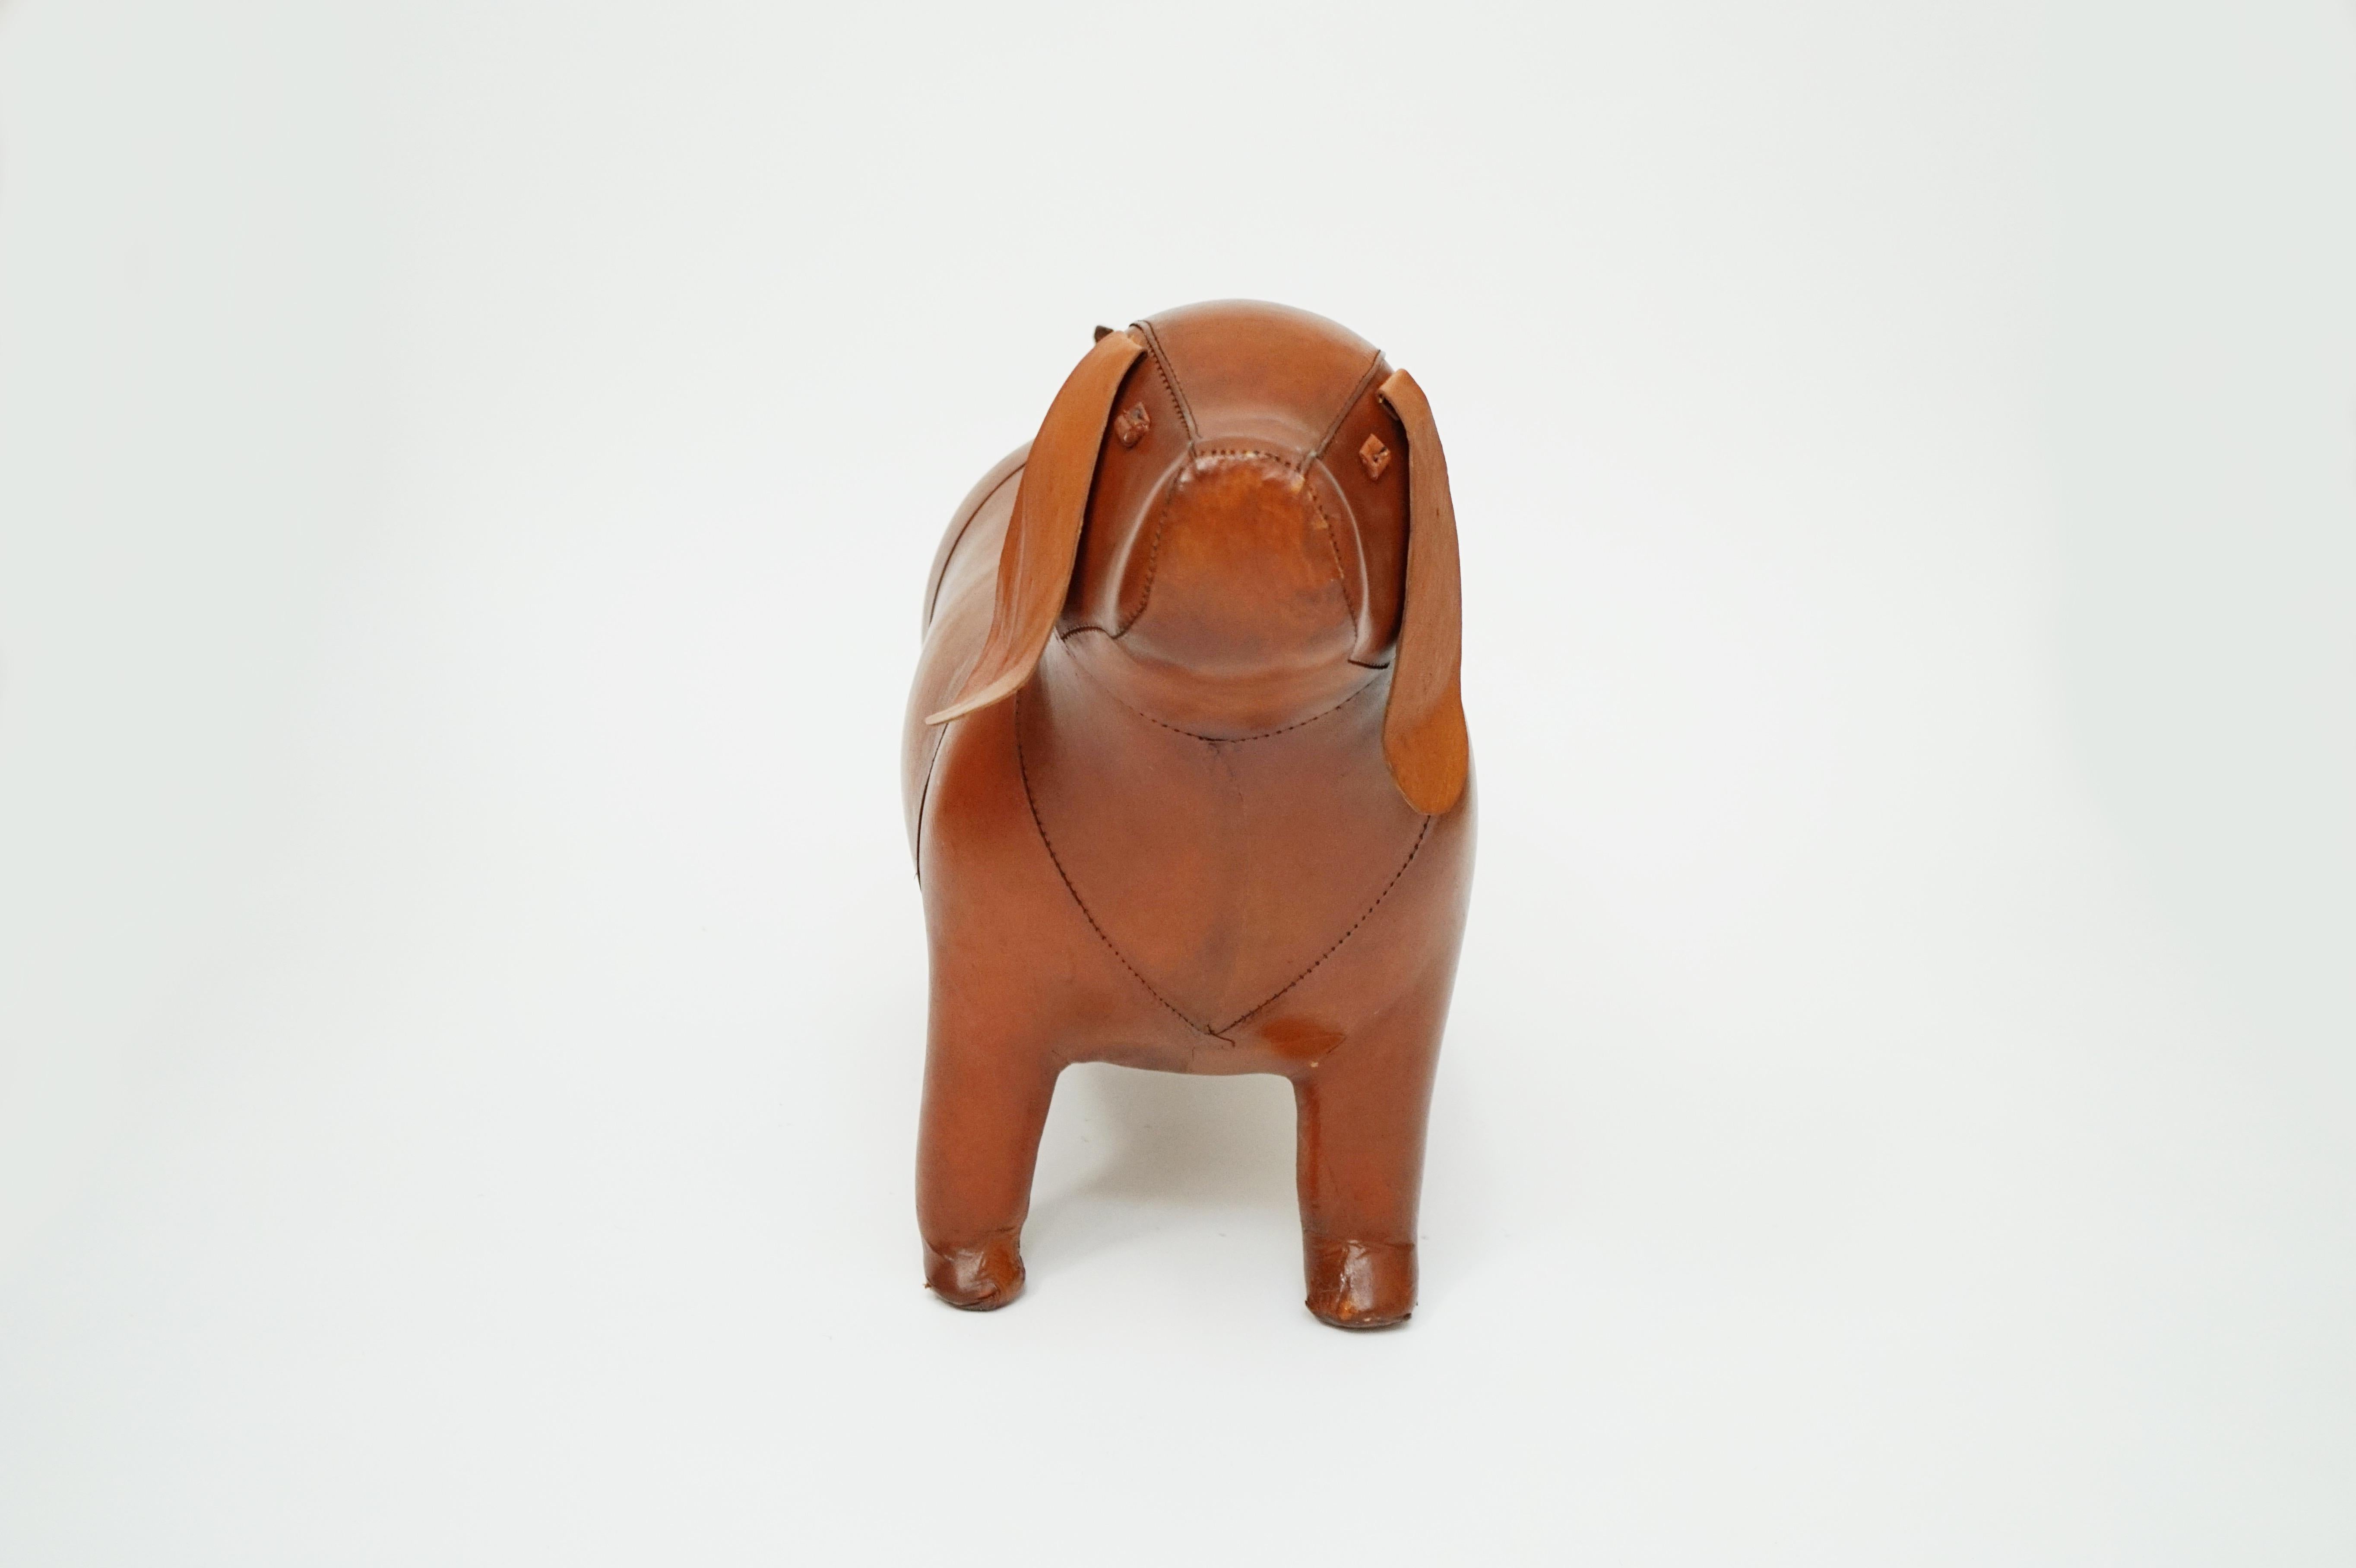 A wonderful leather Dog footstool attributed to Dimitri Omersa for Abercrombie and Fitch, circa 1970s. Sturdy and structurally sound, this dog is ready to be used as a footstool or use as a designer floor or tabletop sculpture or a friendly